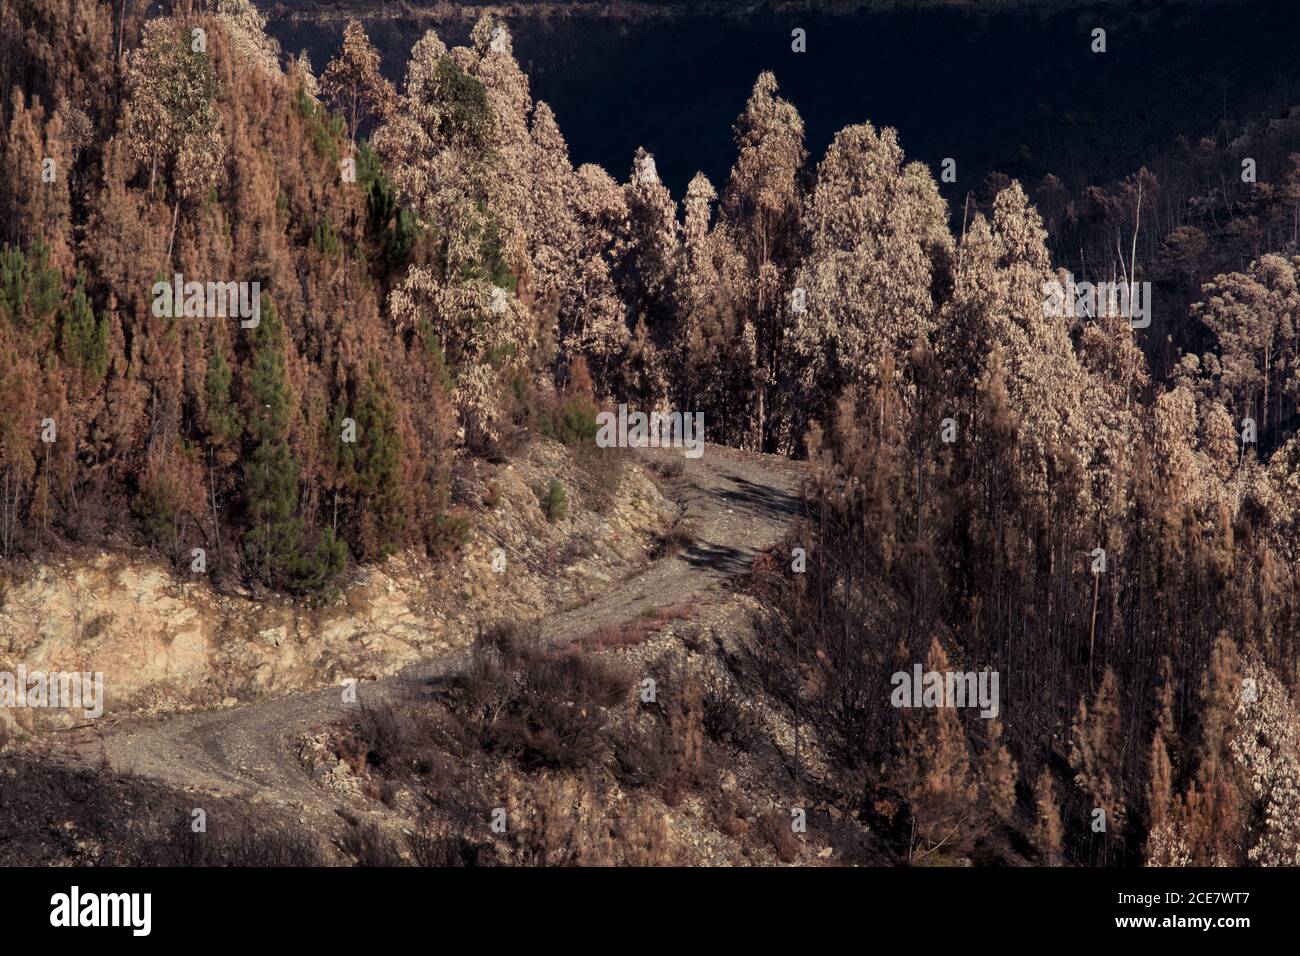 Amazing view of burnt woodland with sandy road and lifeless trees on sunny day Stock Photo